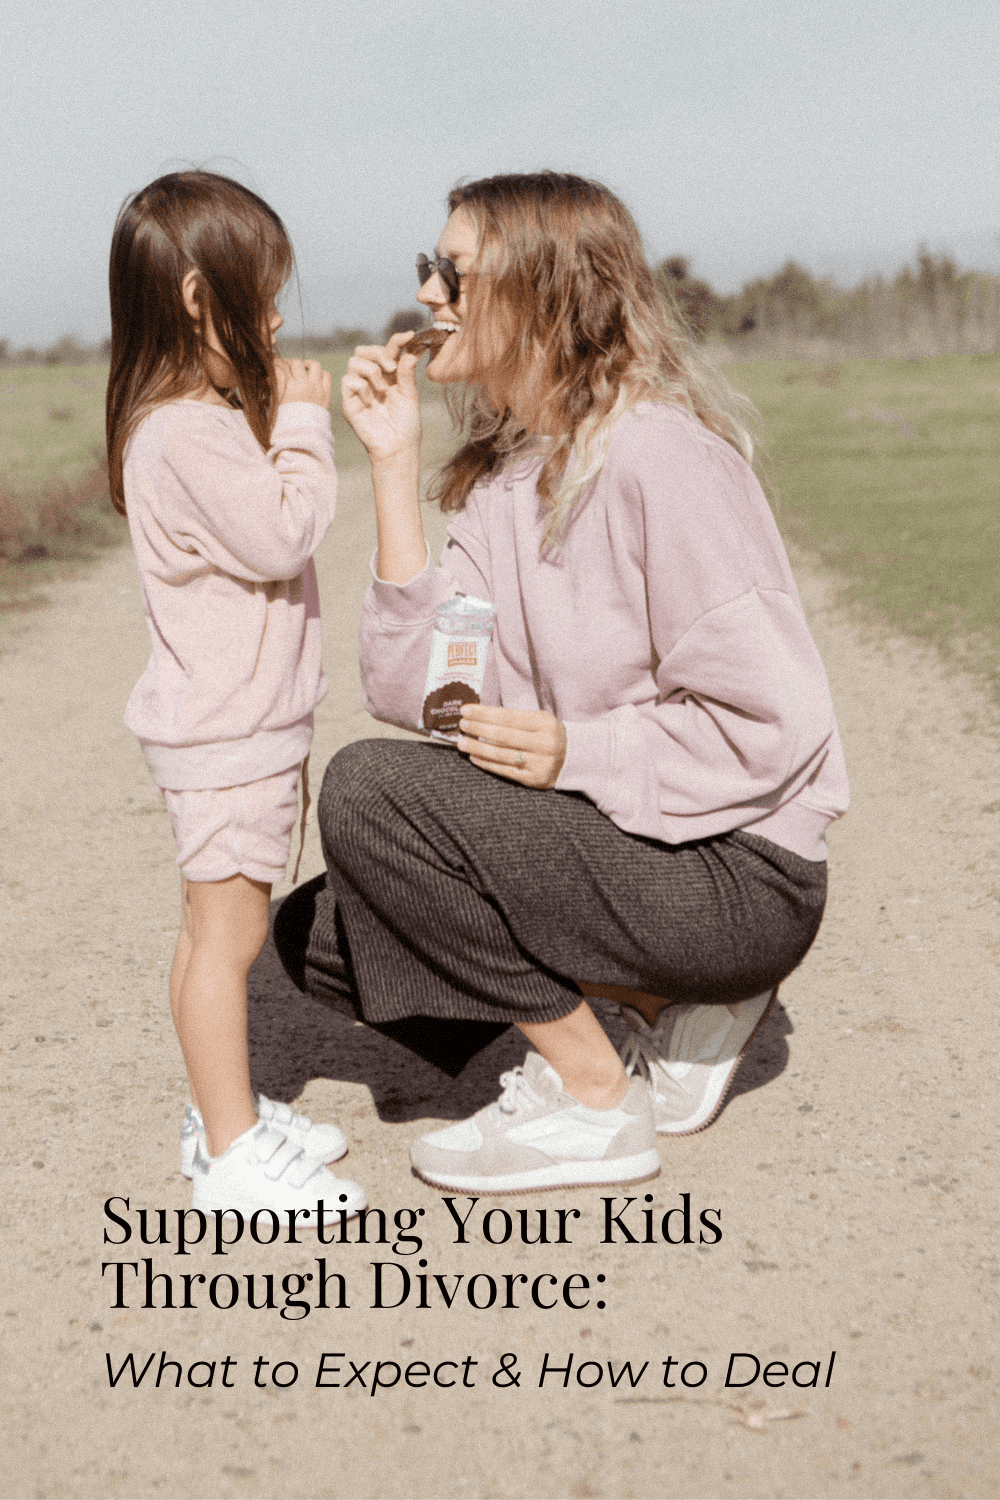 Image of a woman and child with the text "Supporting Your Kids Through Divorce: What to Expect & How to Deal"